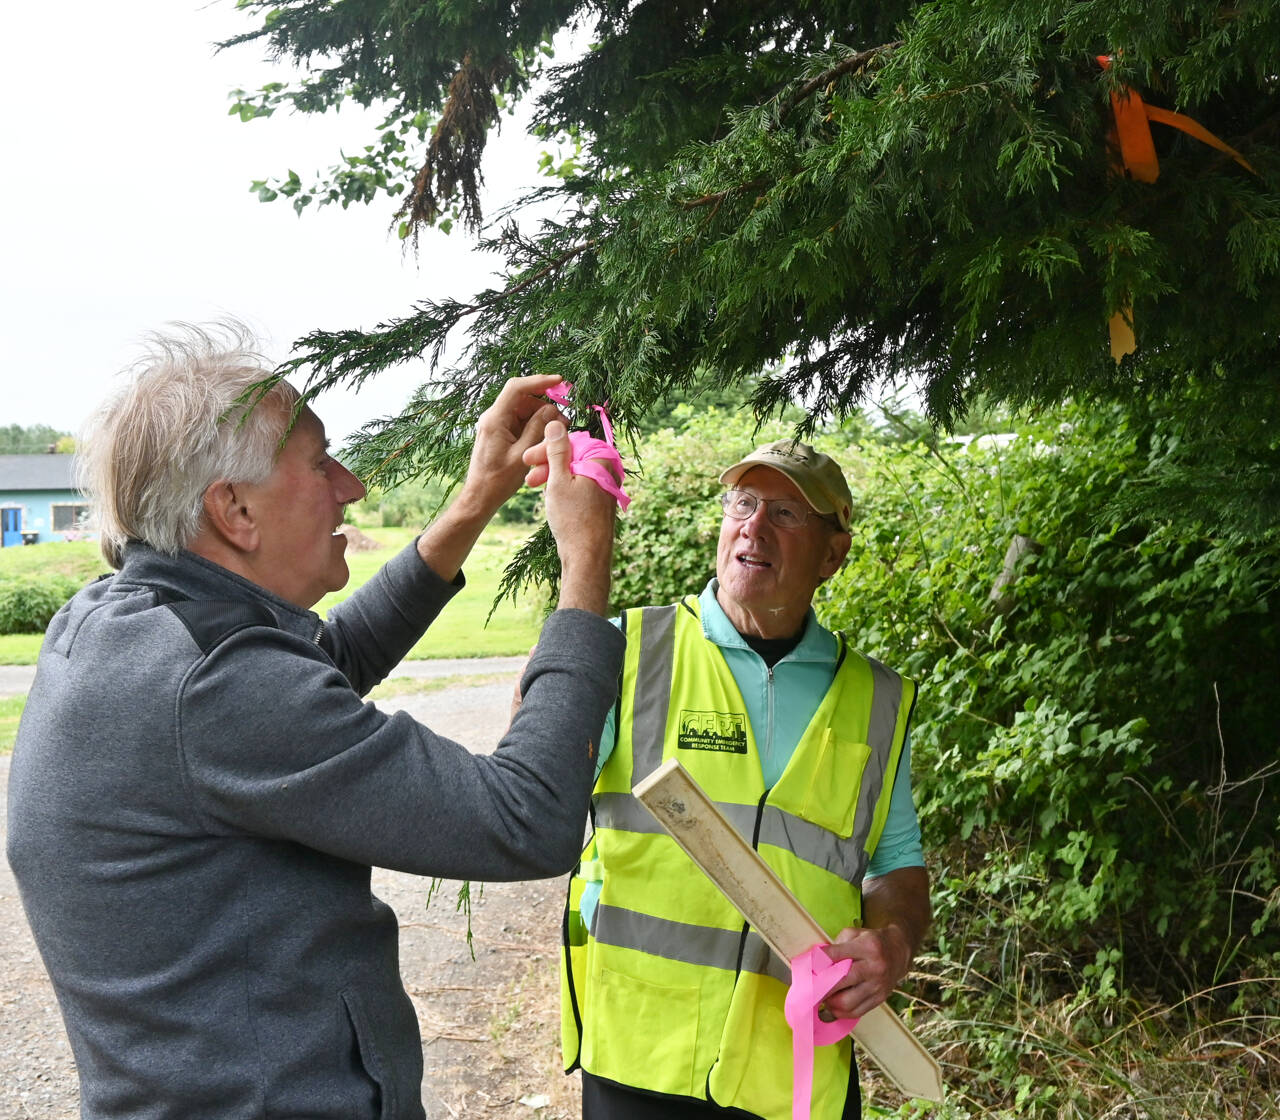 Sequim Gazette photo by Michael Dashiell 
Dan Novak, left, and Mac Macdonald help mark trees as part of the tsunami evacuation route from the 3 Crabs Area to Dungeness Community Church.